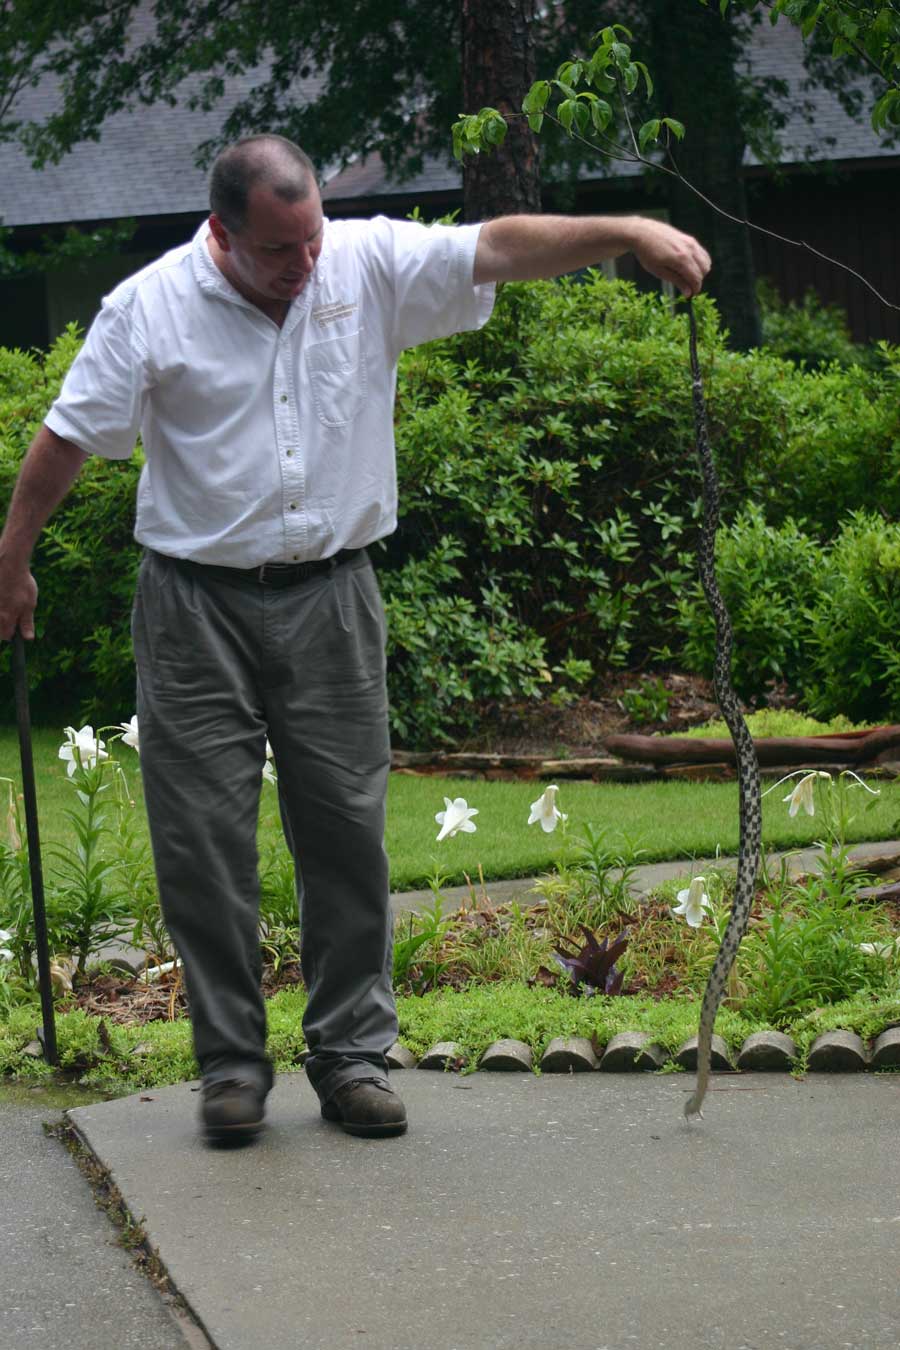 jim holding the snake by its tail